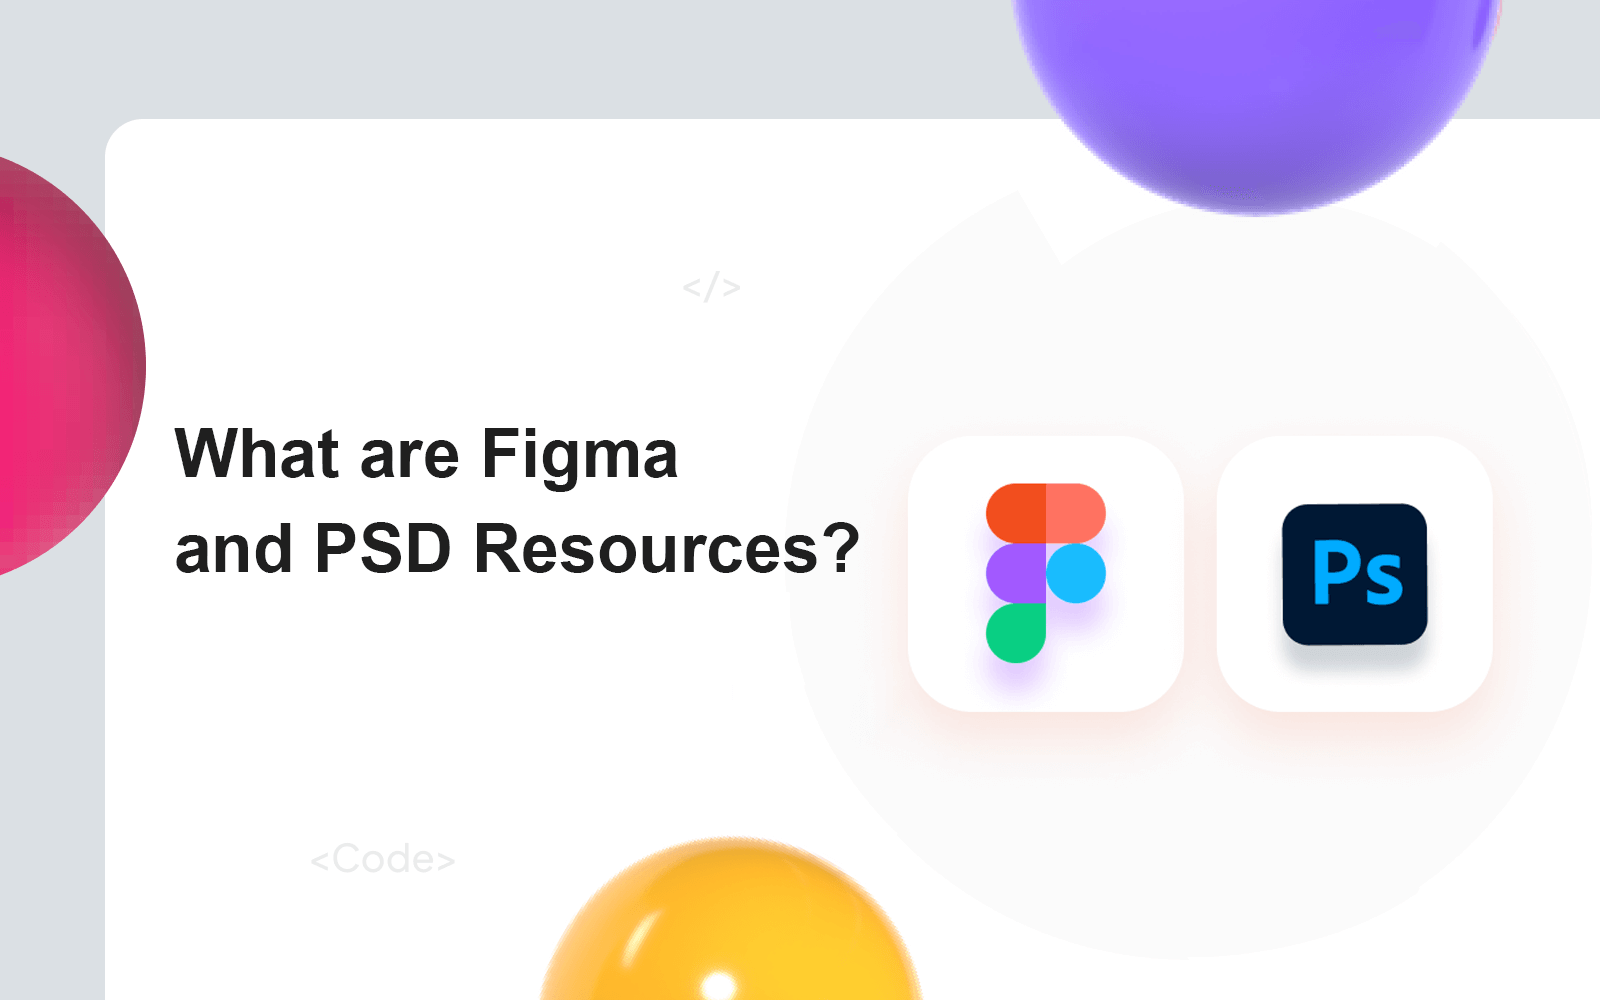 What are Figma and PSD Resources?